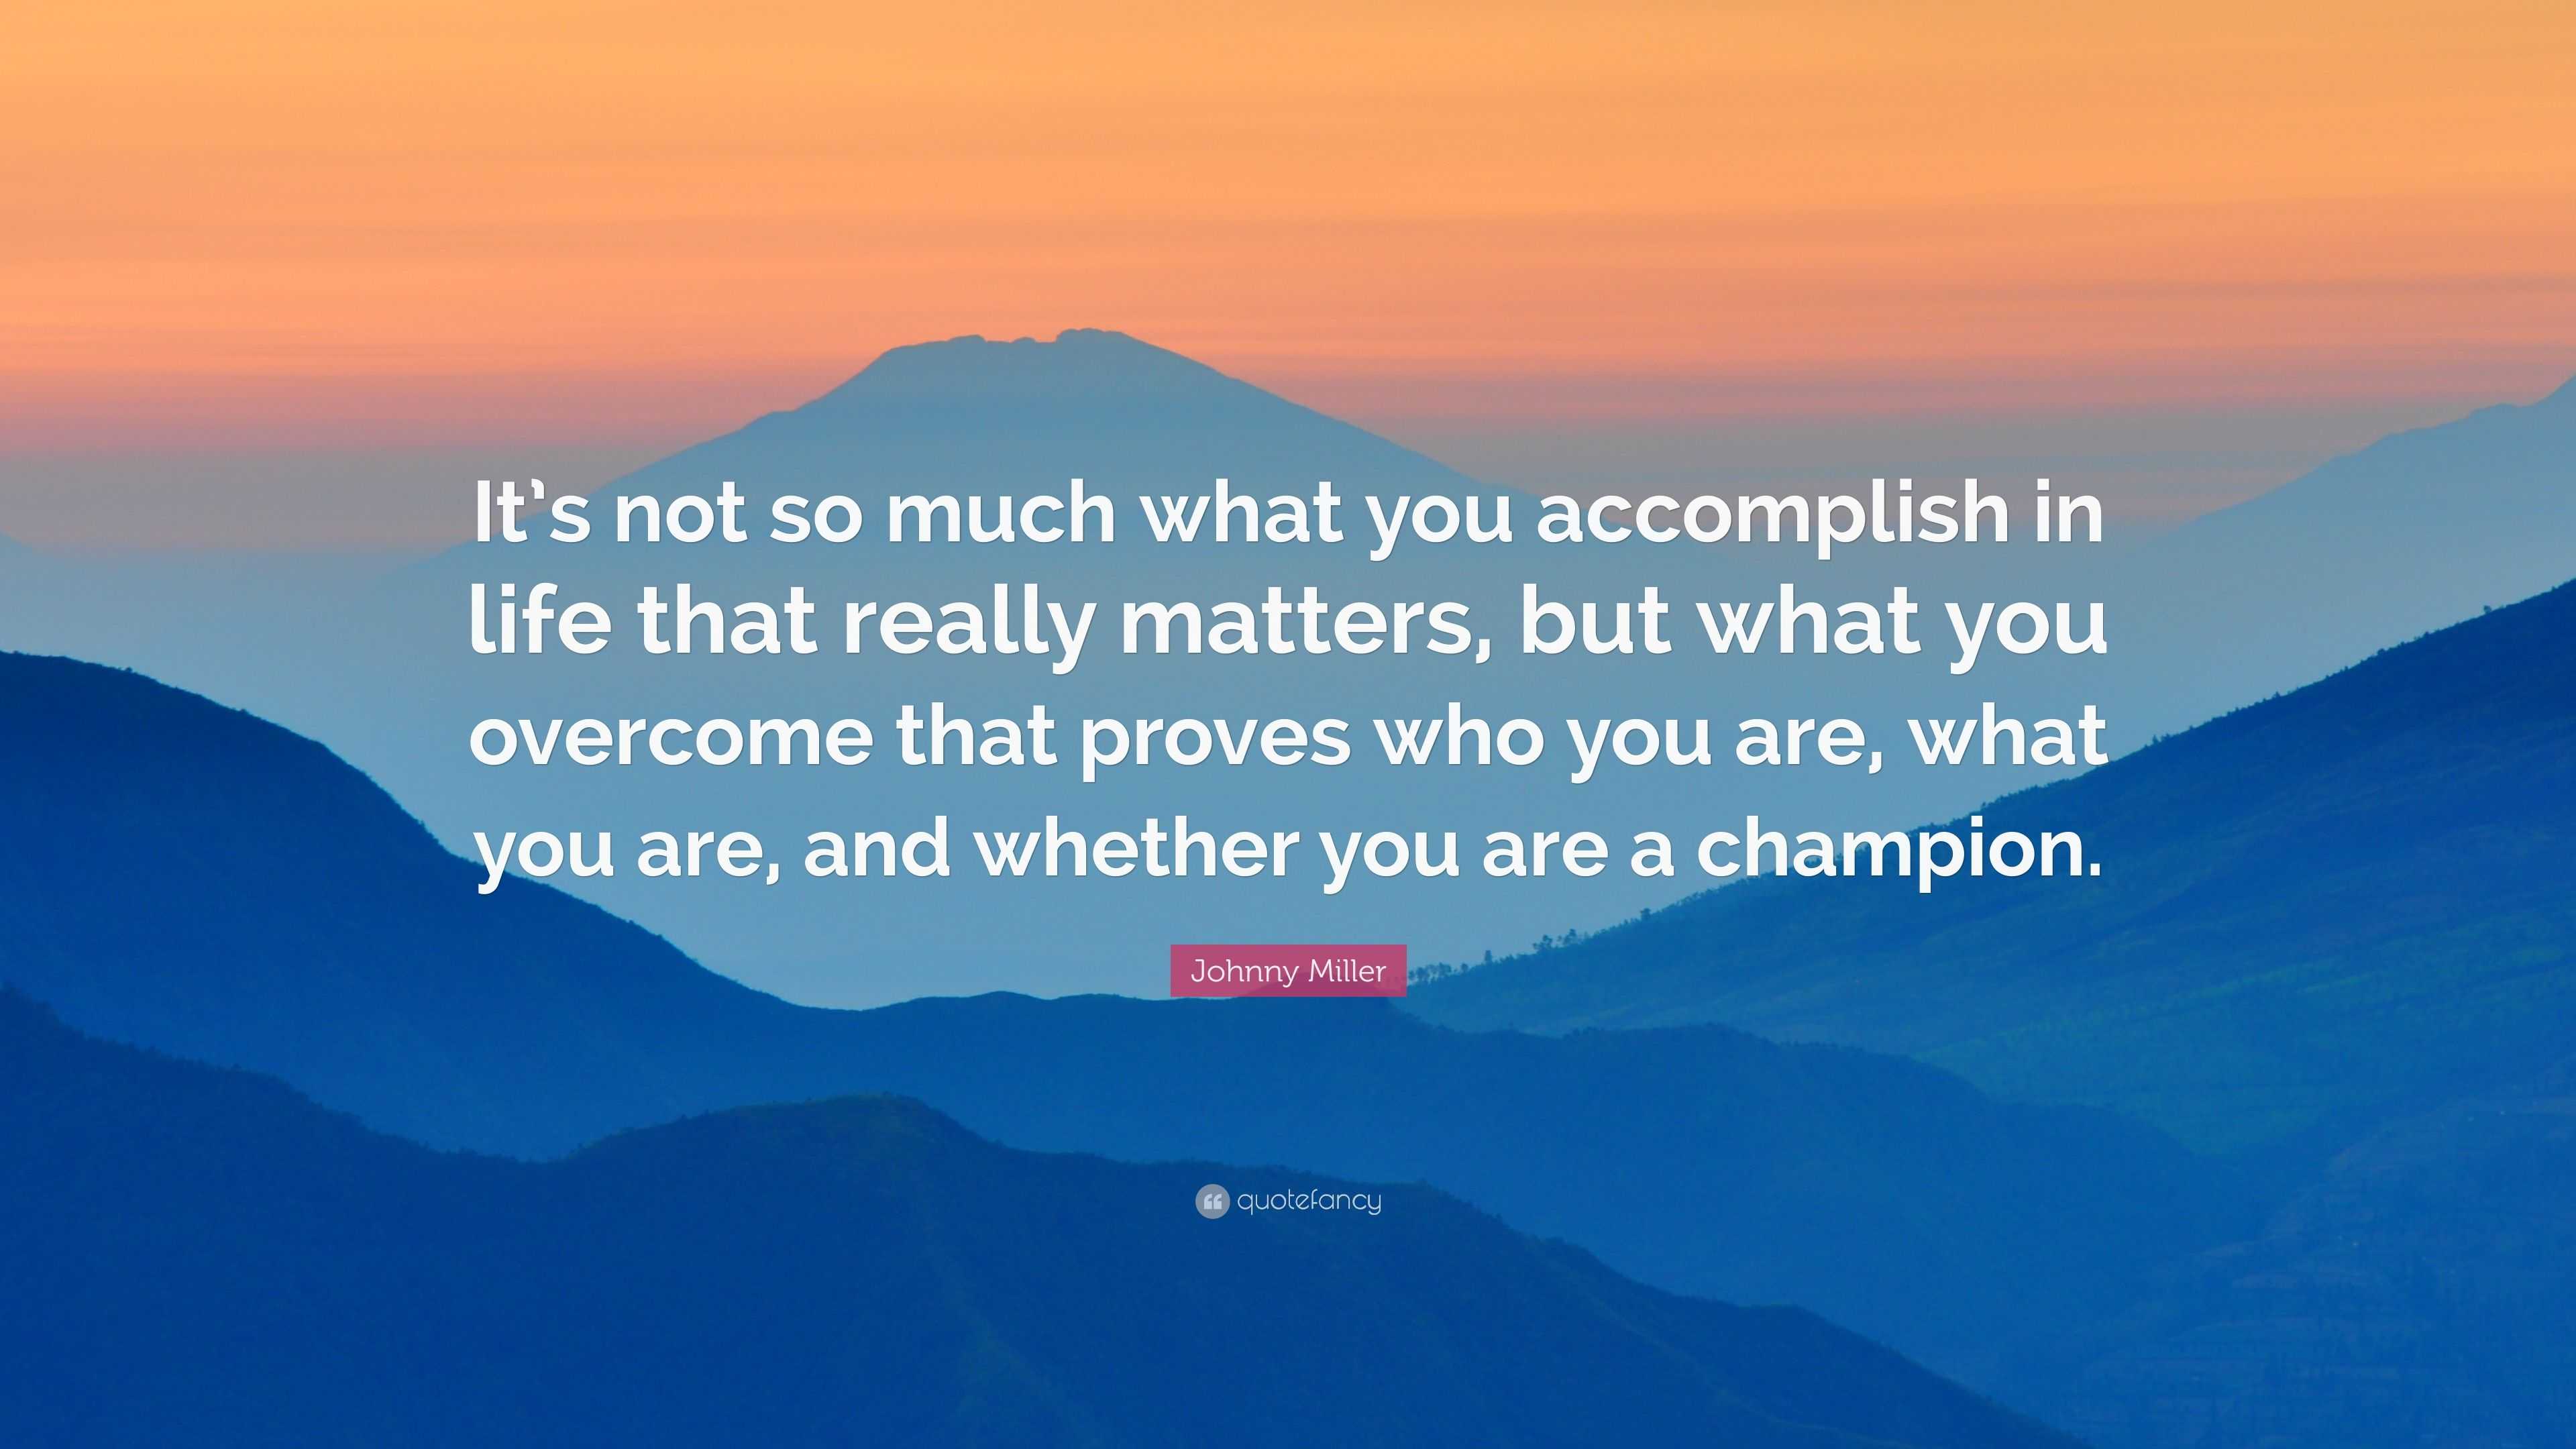 Johnny Miller Quote: “It’s not so much what you accomplish in life that ...